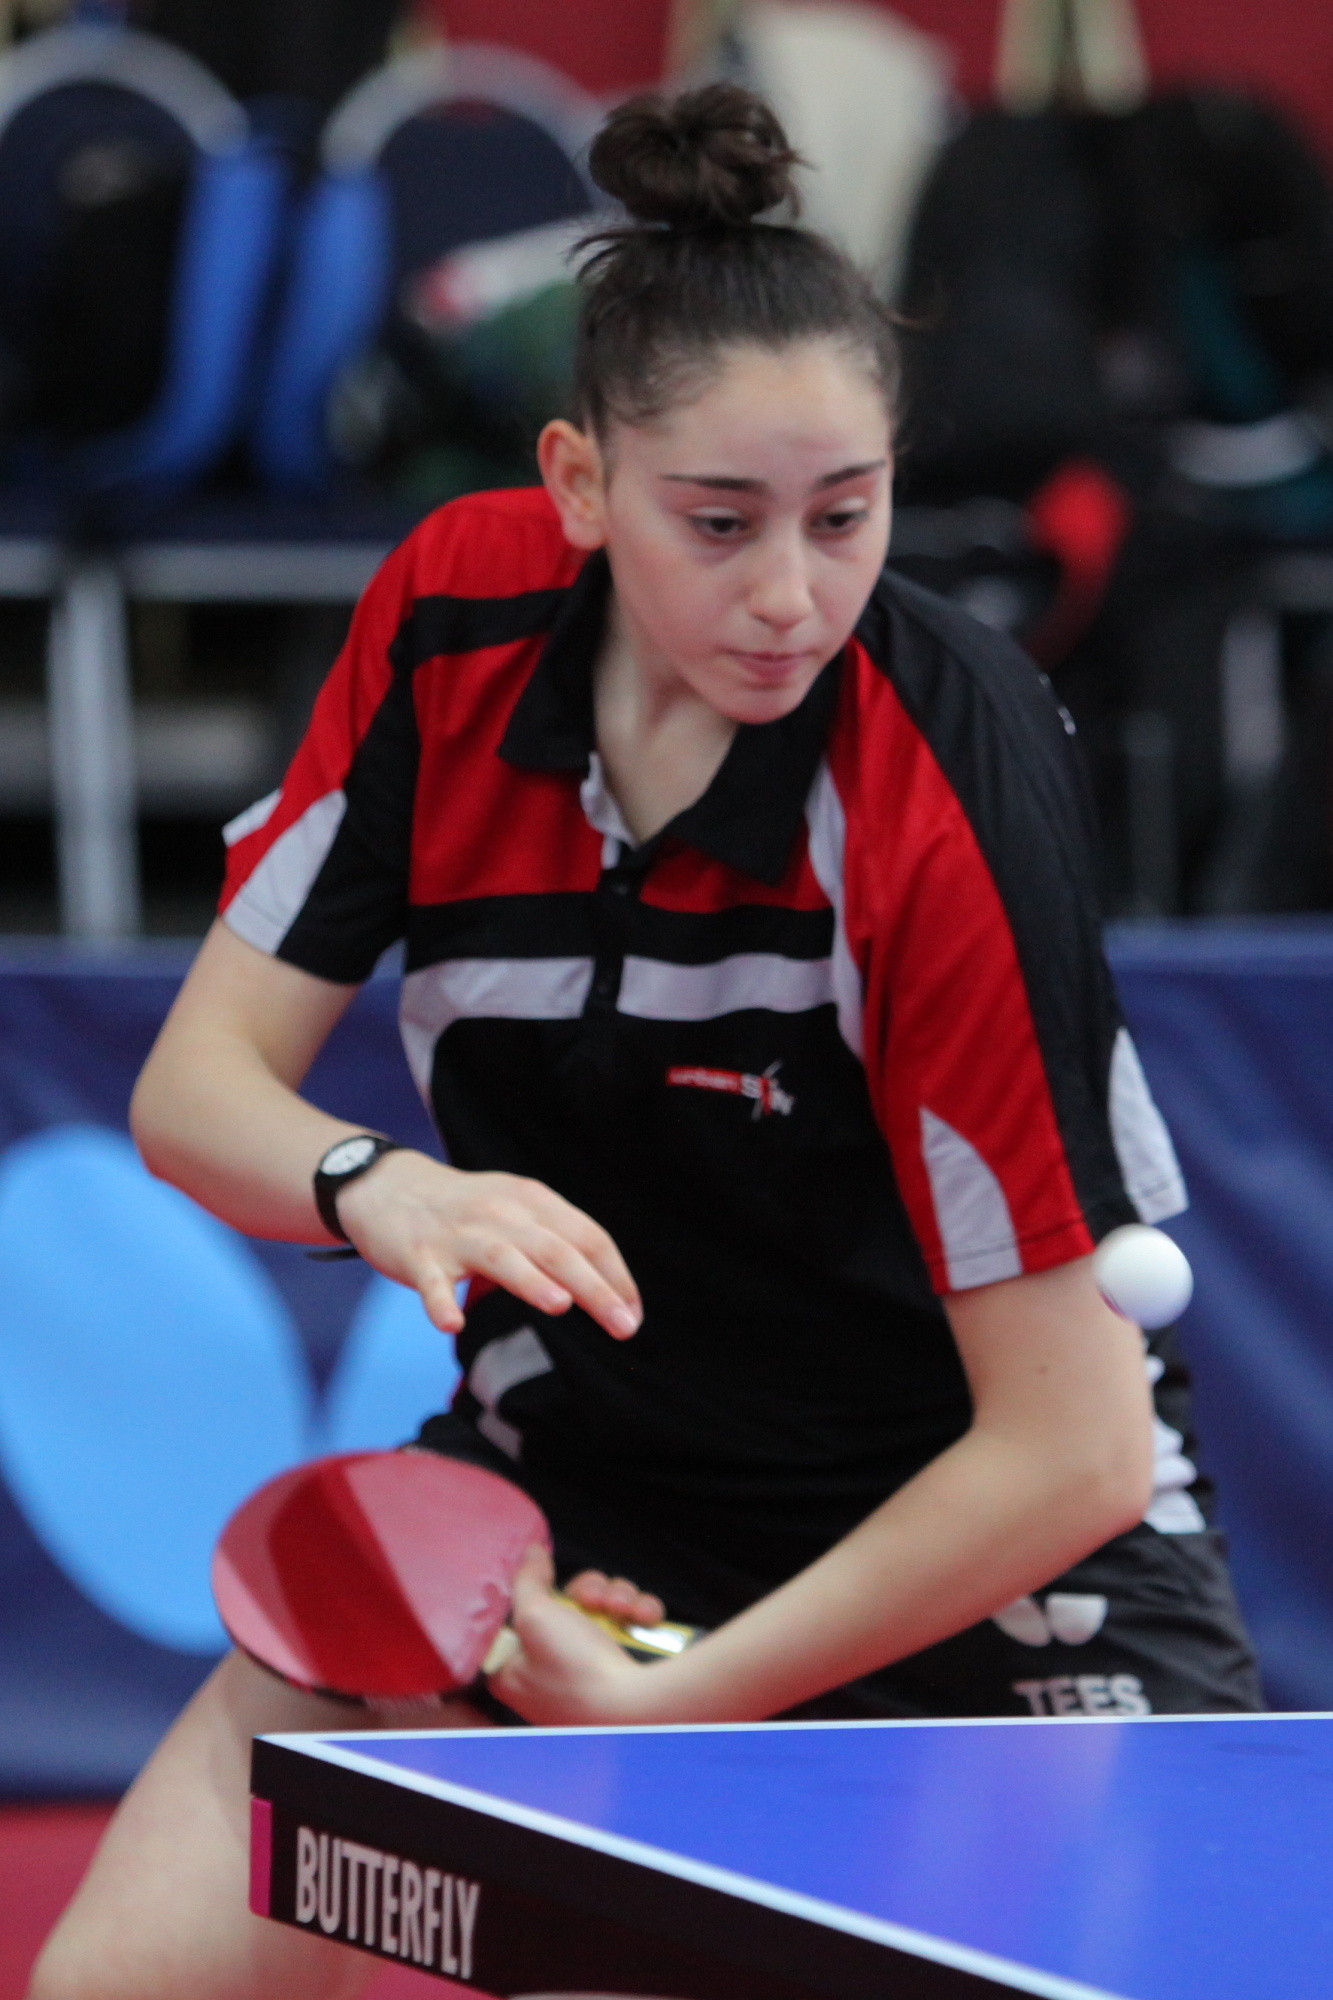 Totteridge table tennis player Millie Rogove wins two medals in Slovak events - Times Series